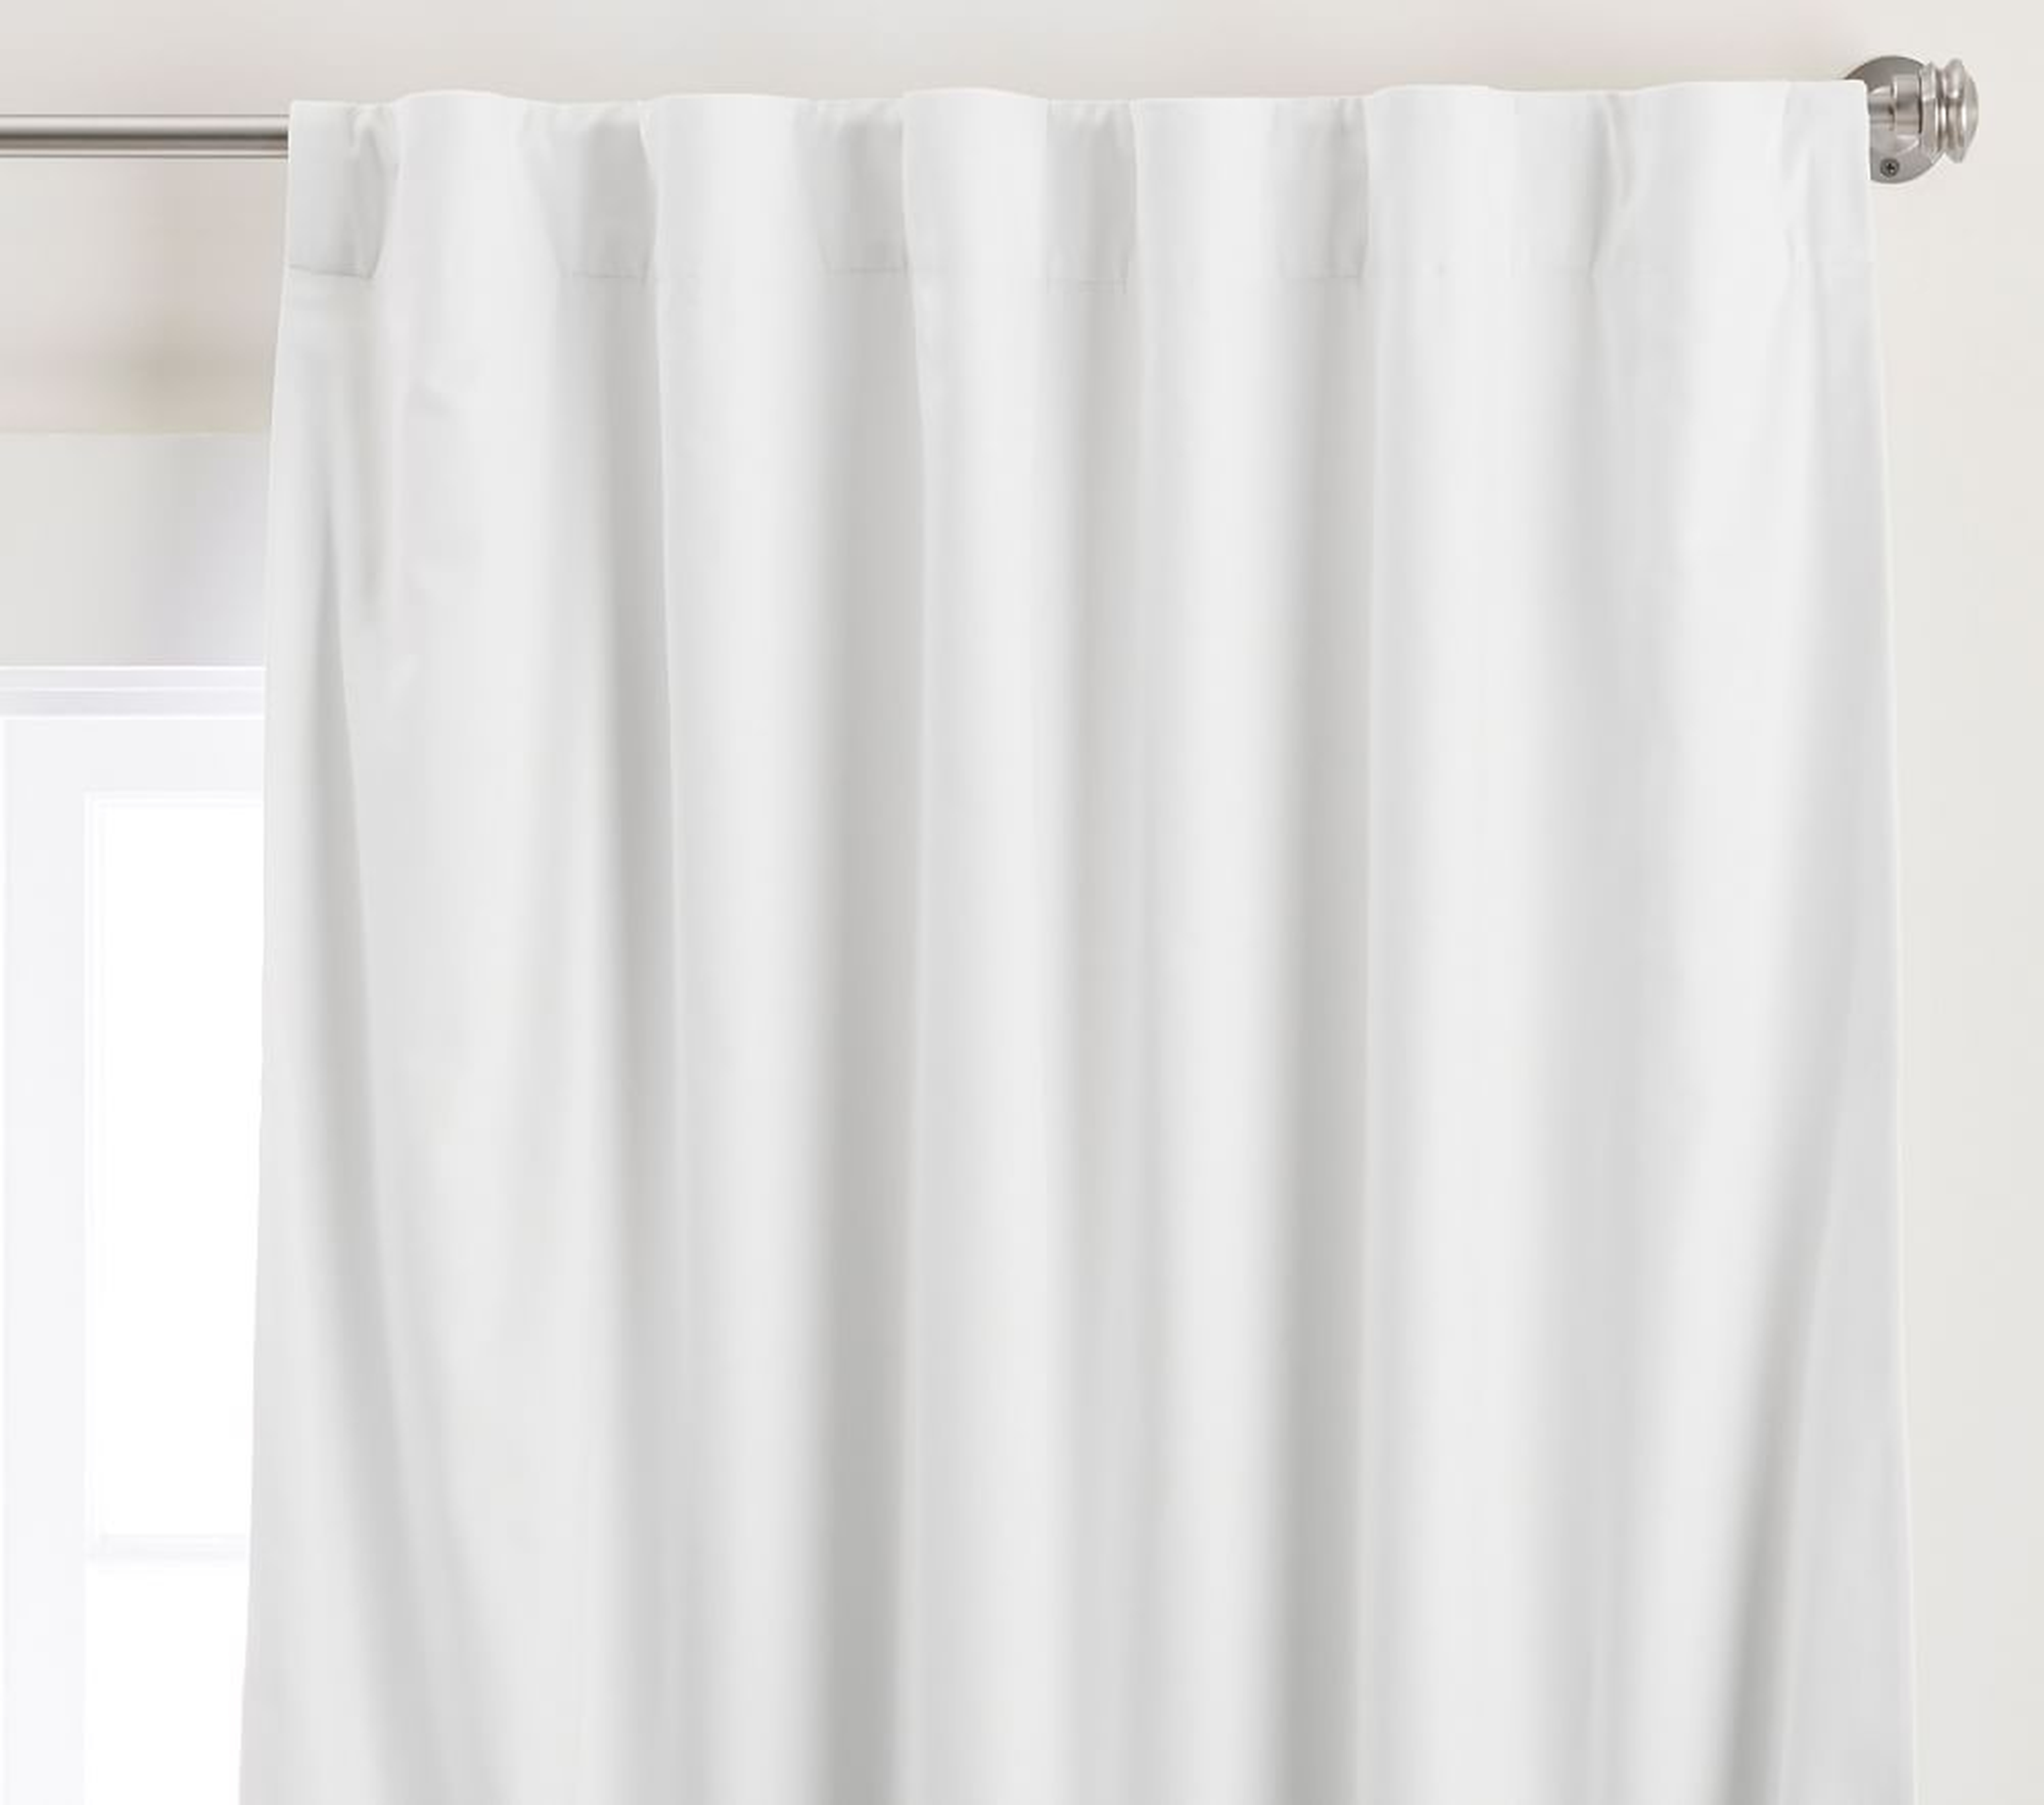 Soothing Sleep Noise Reducing Blackout Curtain, 96 Inches, White - Pottery Barn Kids